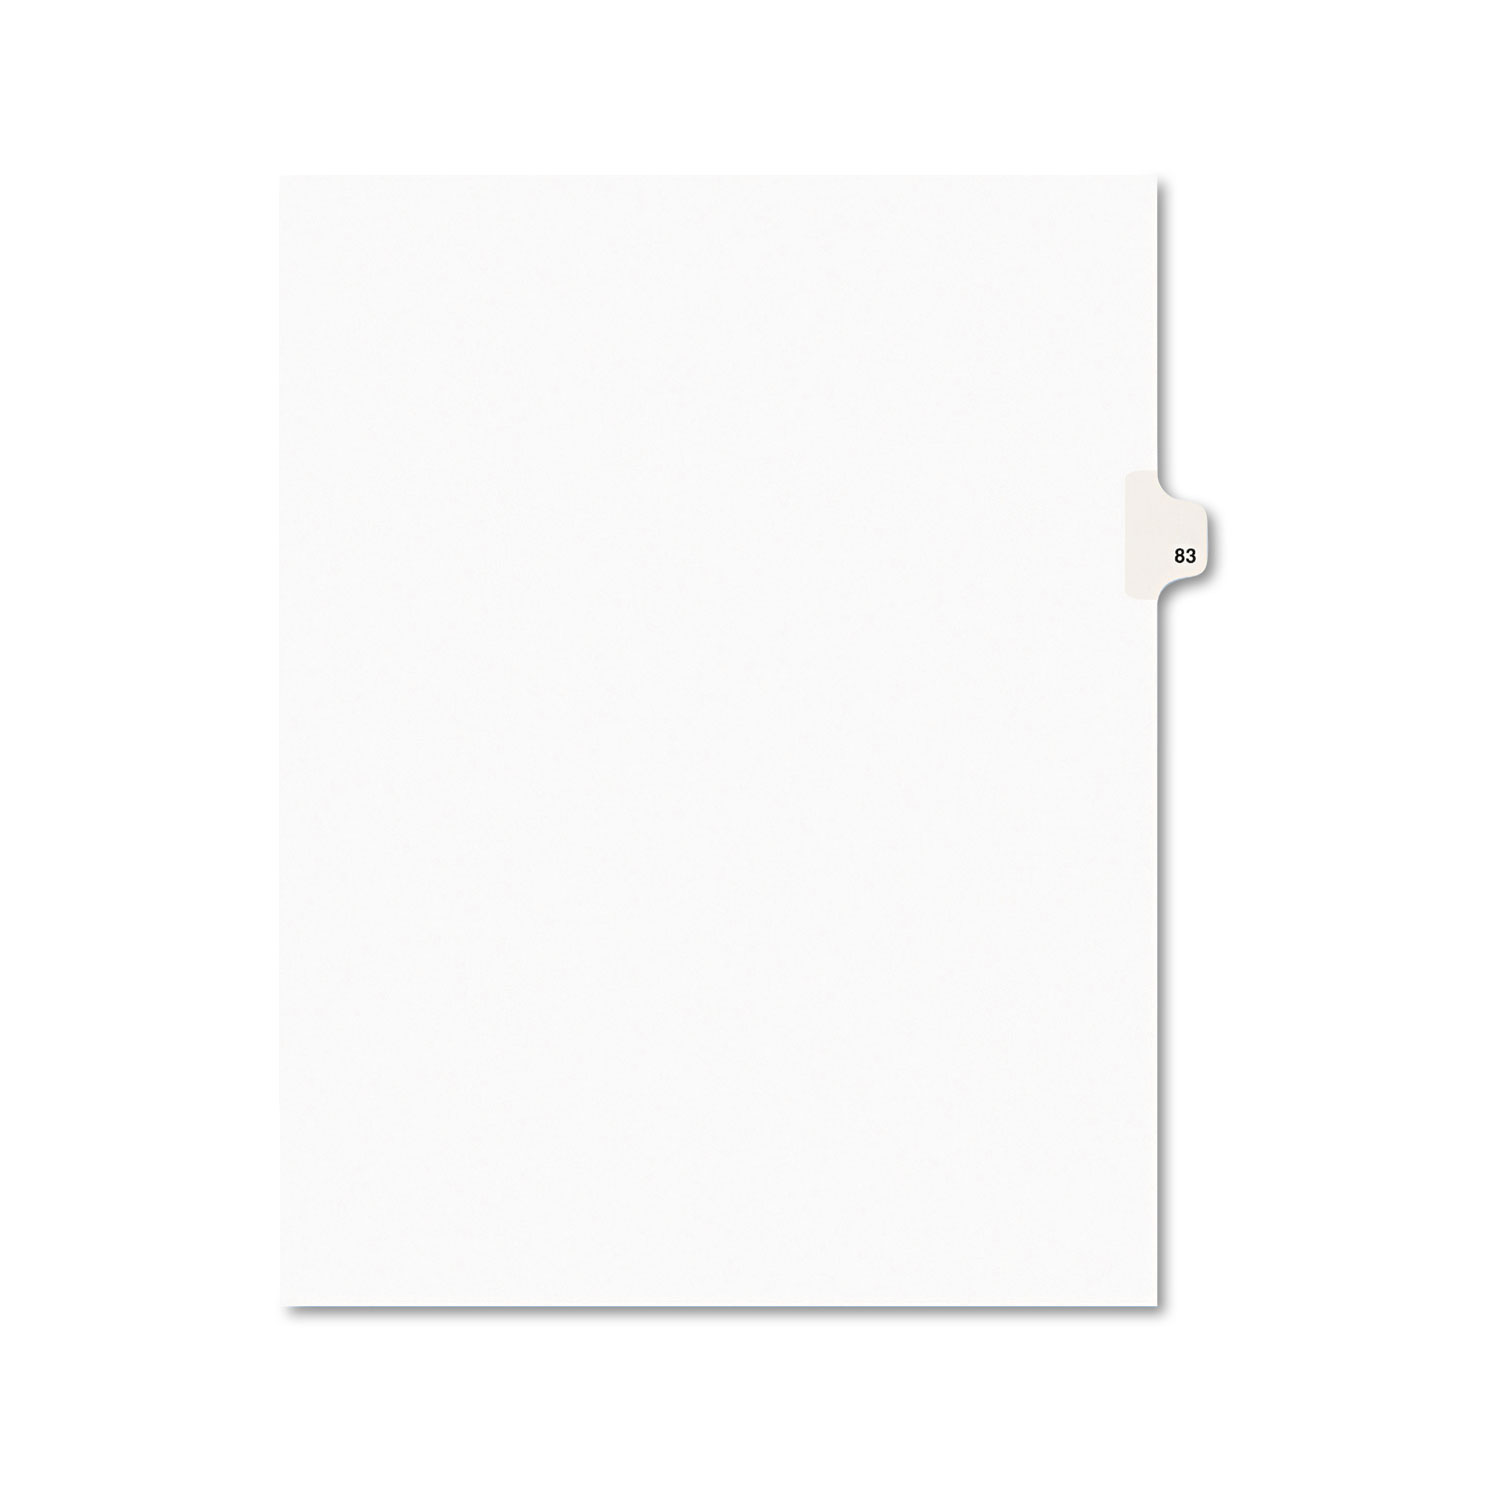  Avery 01083 Preprinted Legal Exhibit Side Tab Index Dividers, Avery Style, 10-Tab, 83, 11 x 8.5, White, 25/Pack (AVE01083) 